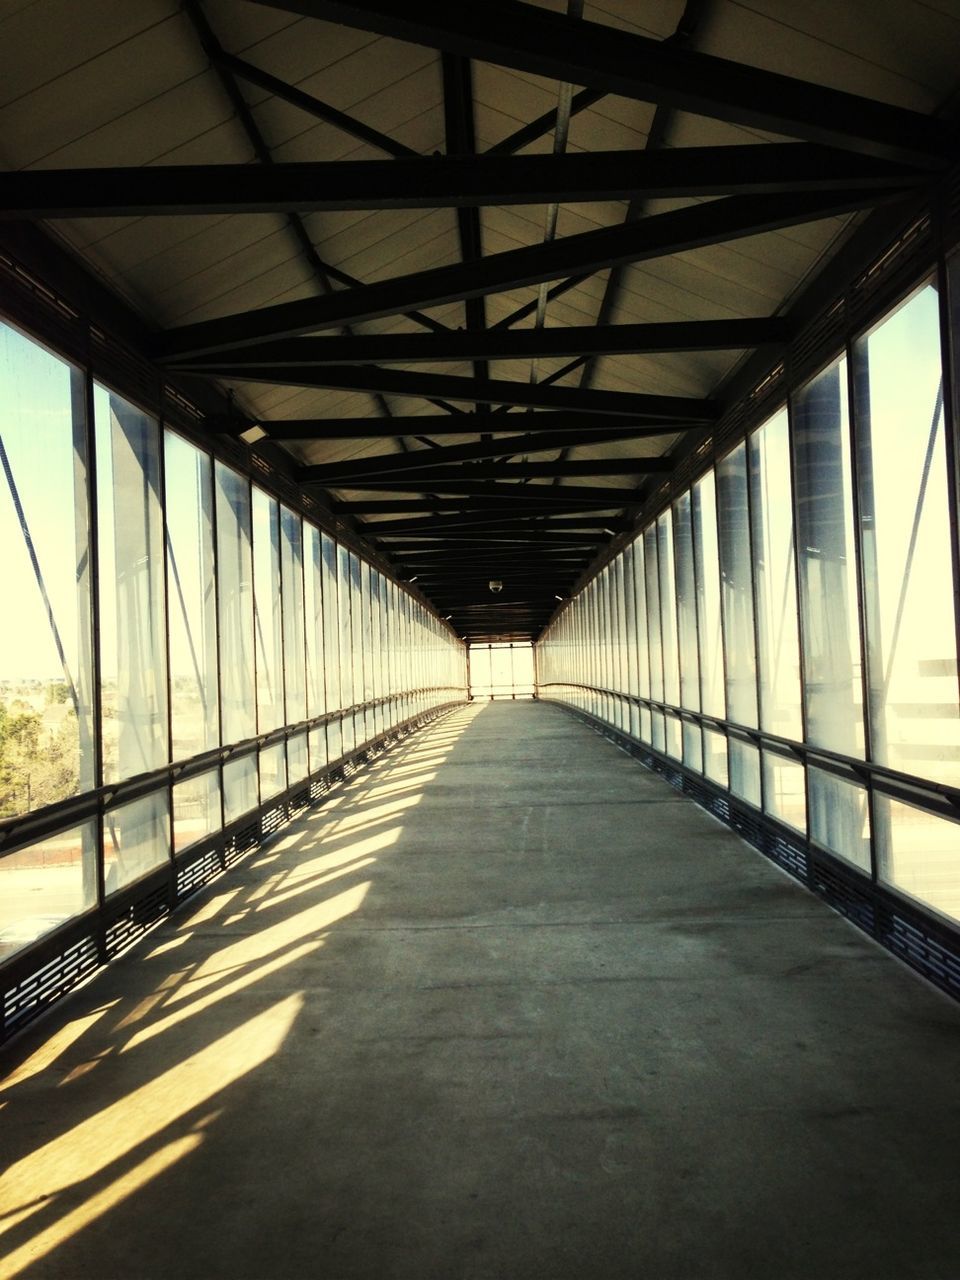 connection, bridge - man made structure, the way forward, diminishing perspective, built structure, architecture, transportation, vanishing point, engineering, long, bridge, railing, sky, footbridge, road, no people, metal, day, outdoors, sunlight